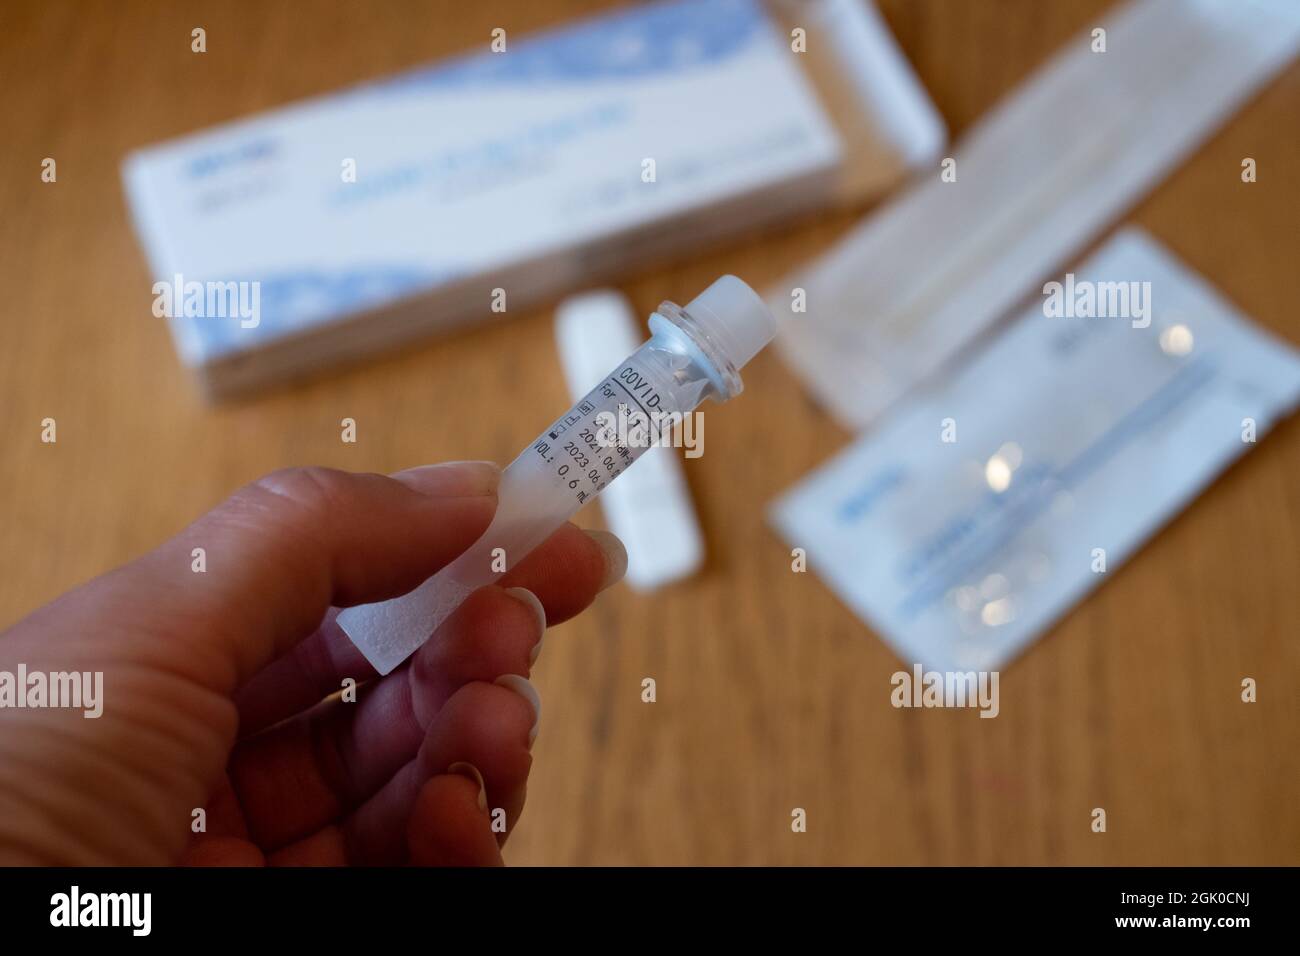 COVID-19 Ag Test kit for self-testing. Corona virus diagnosis. Open package on wooden home table. Stock Photo